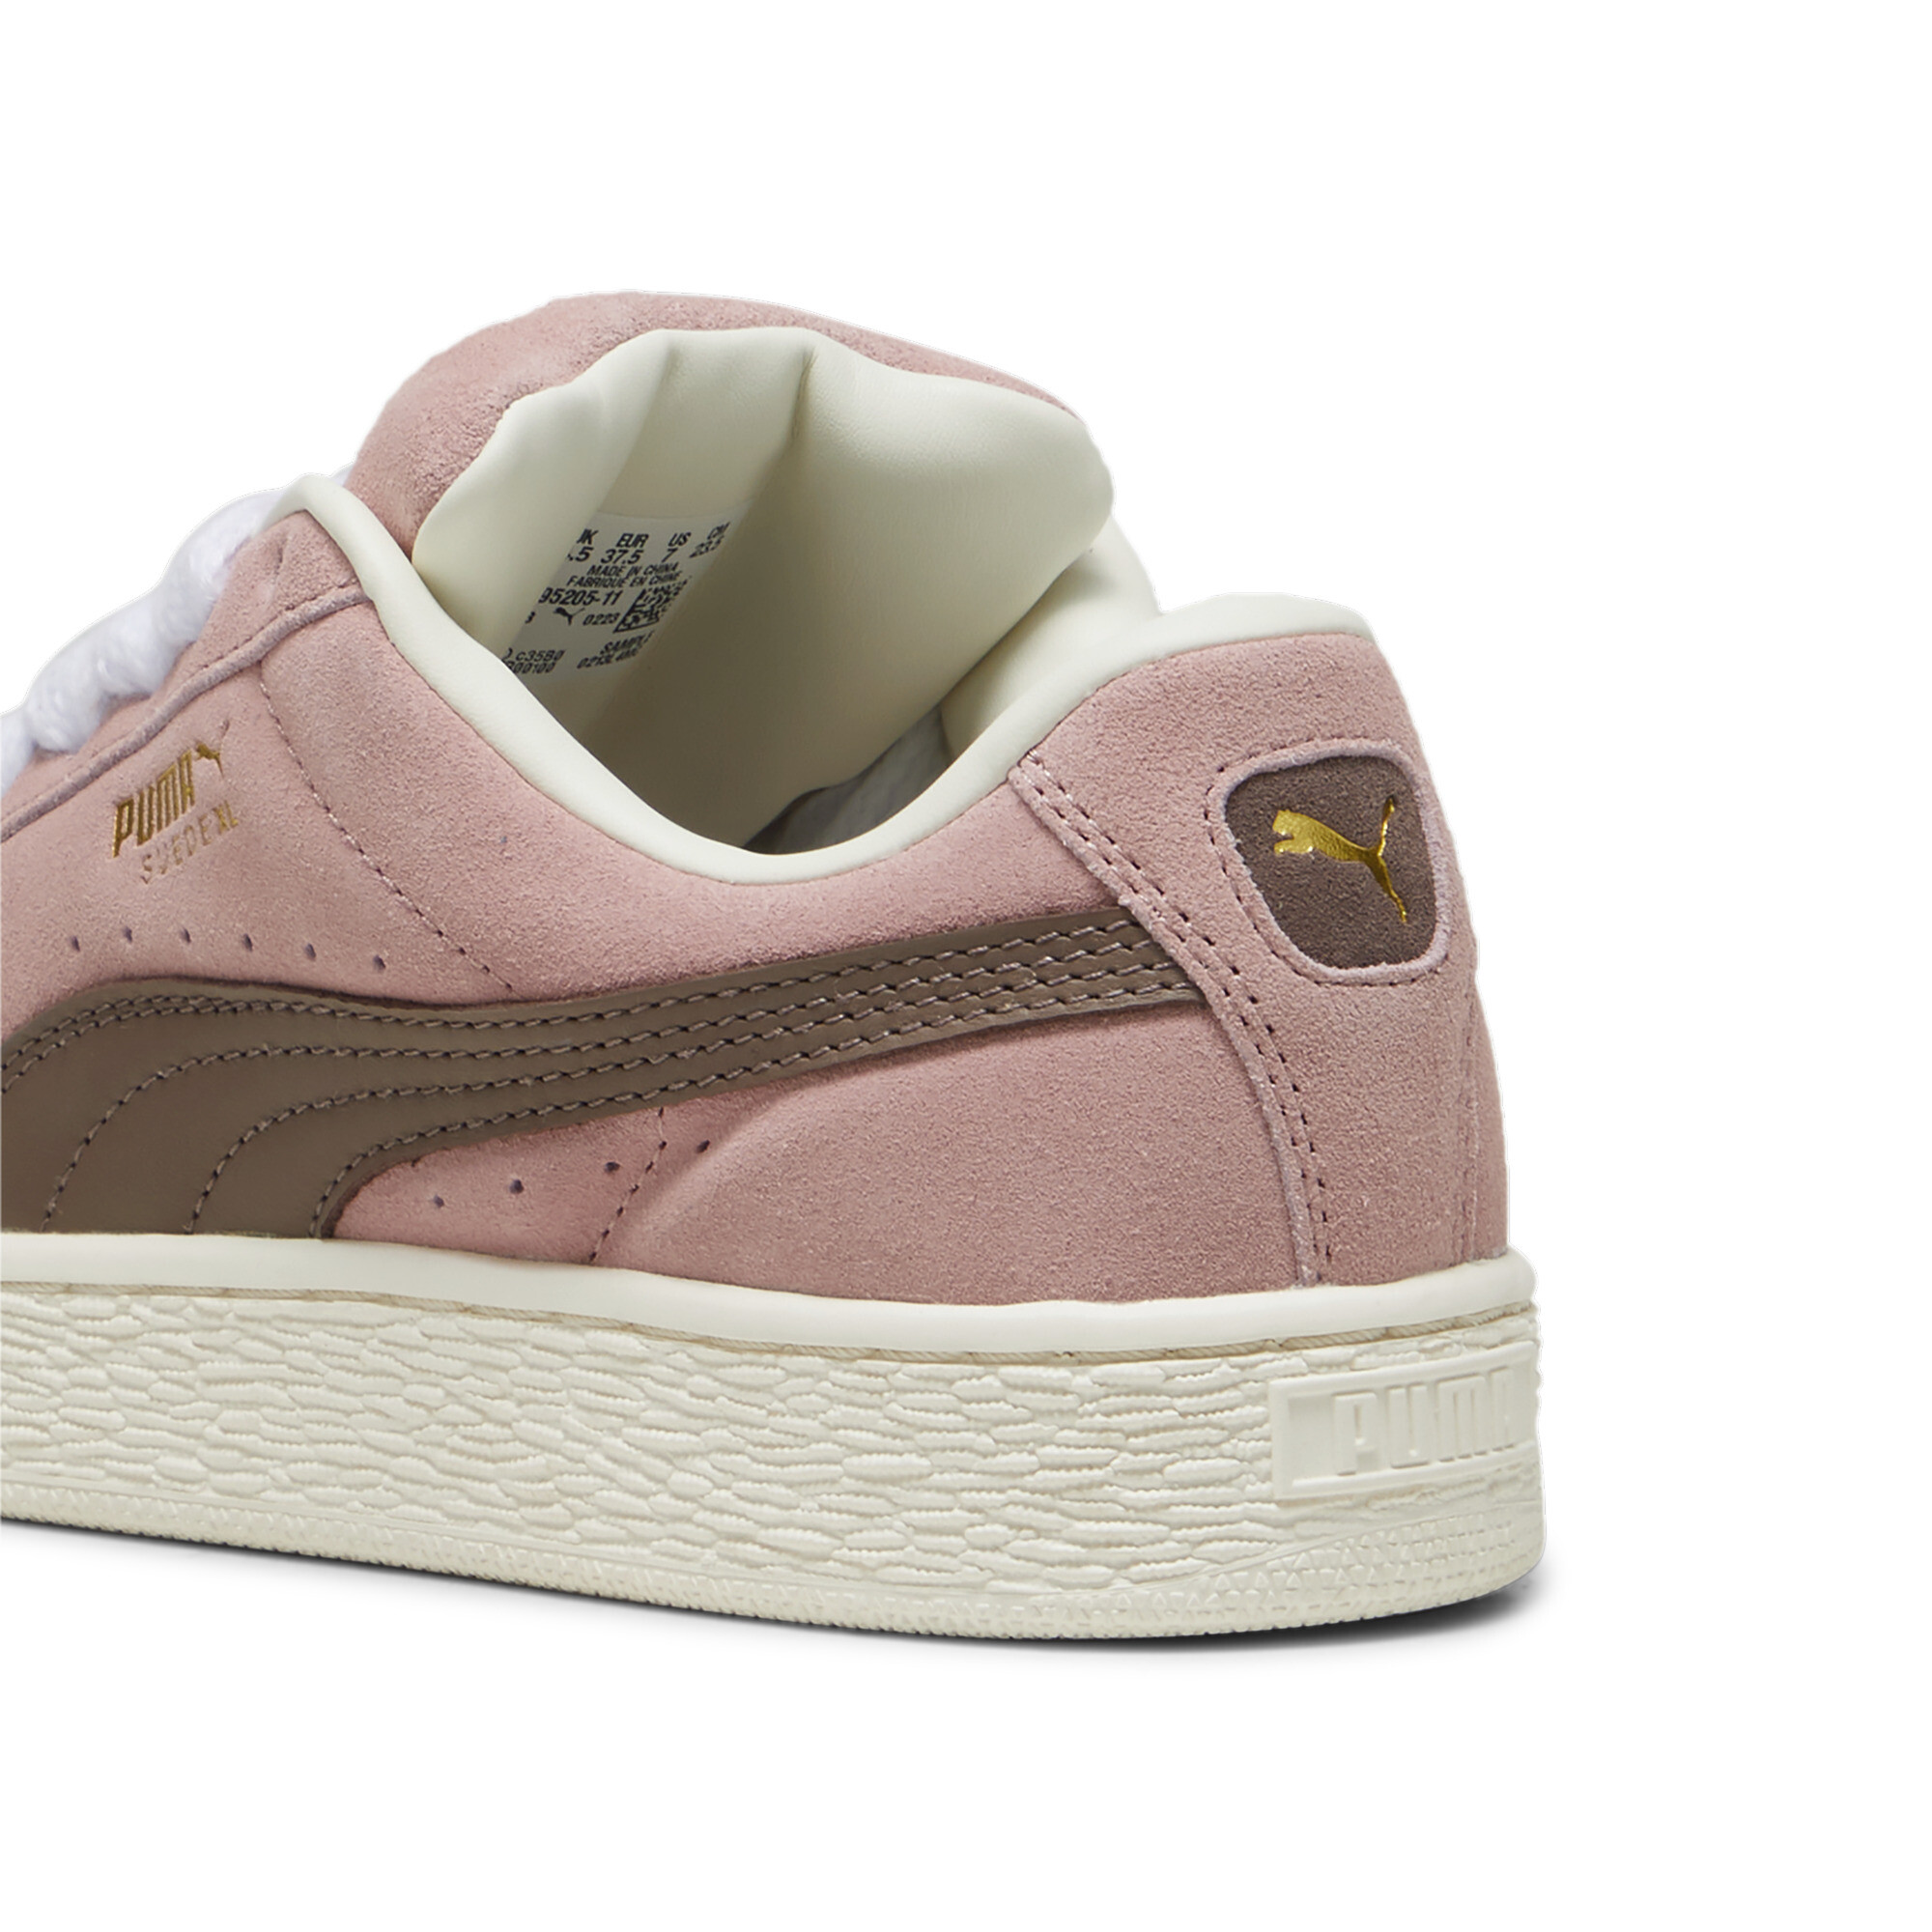 Puma Suede XL Sneakers Unisex, Pink, Size 36, Shoes